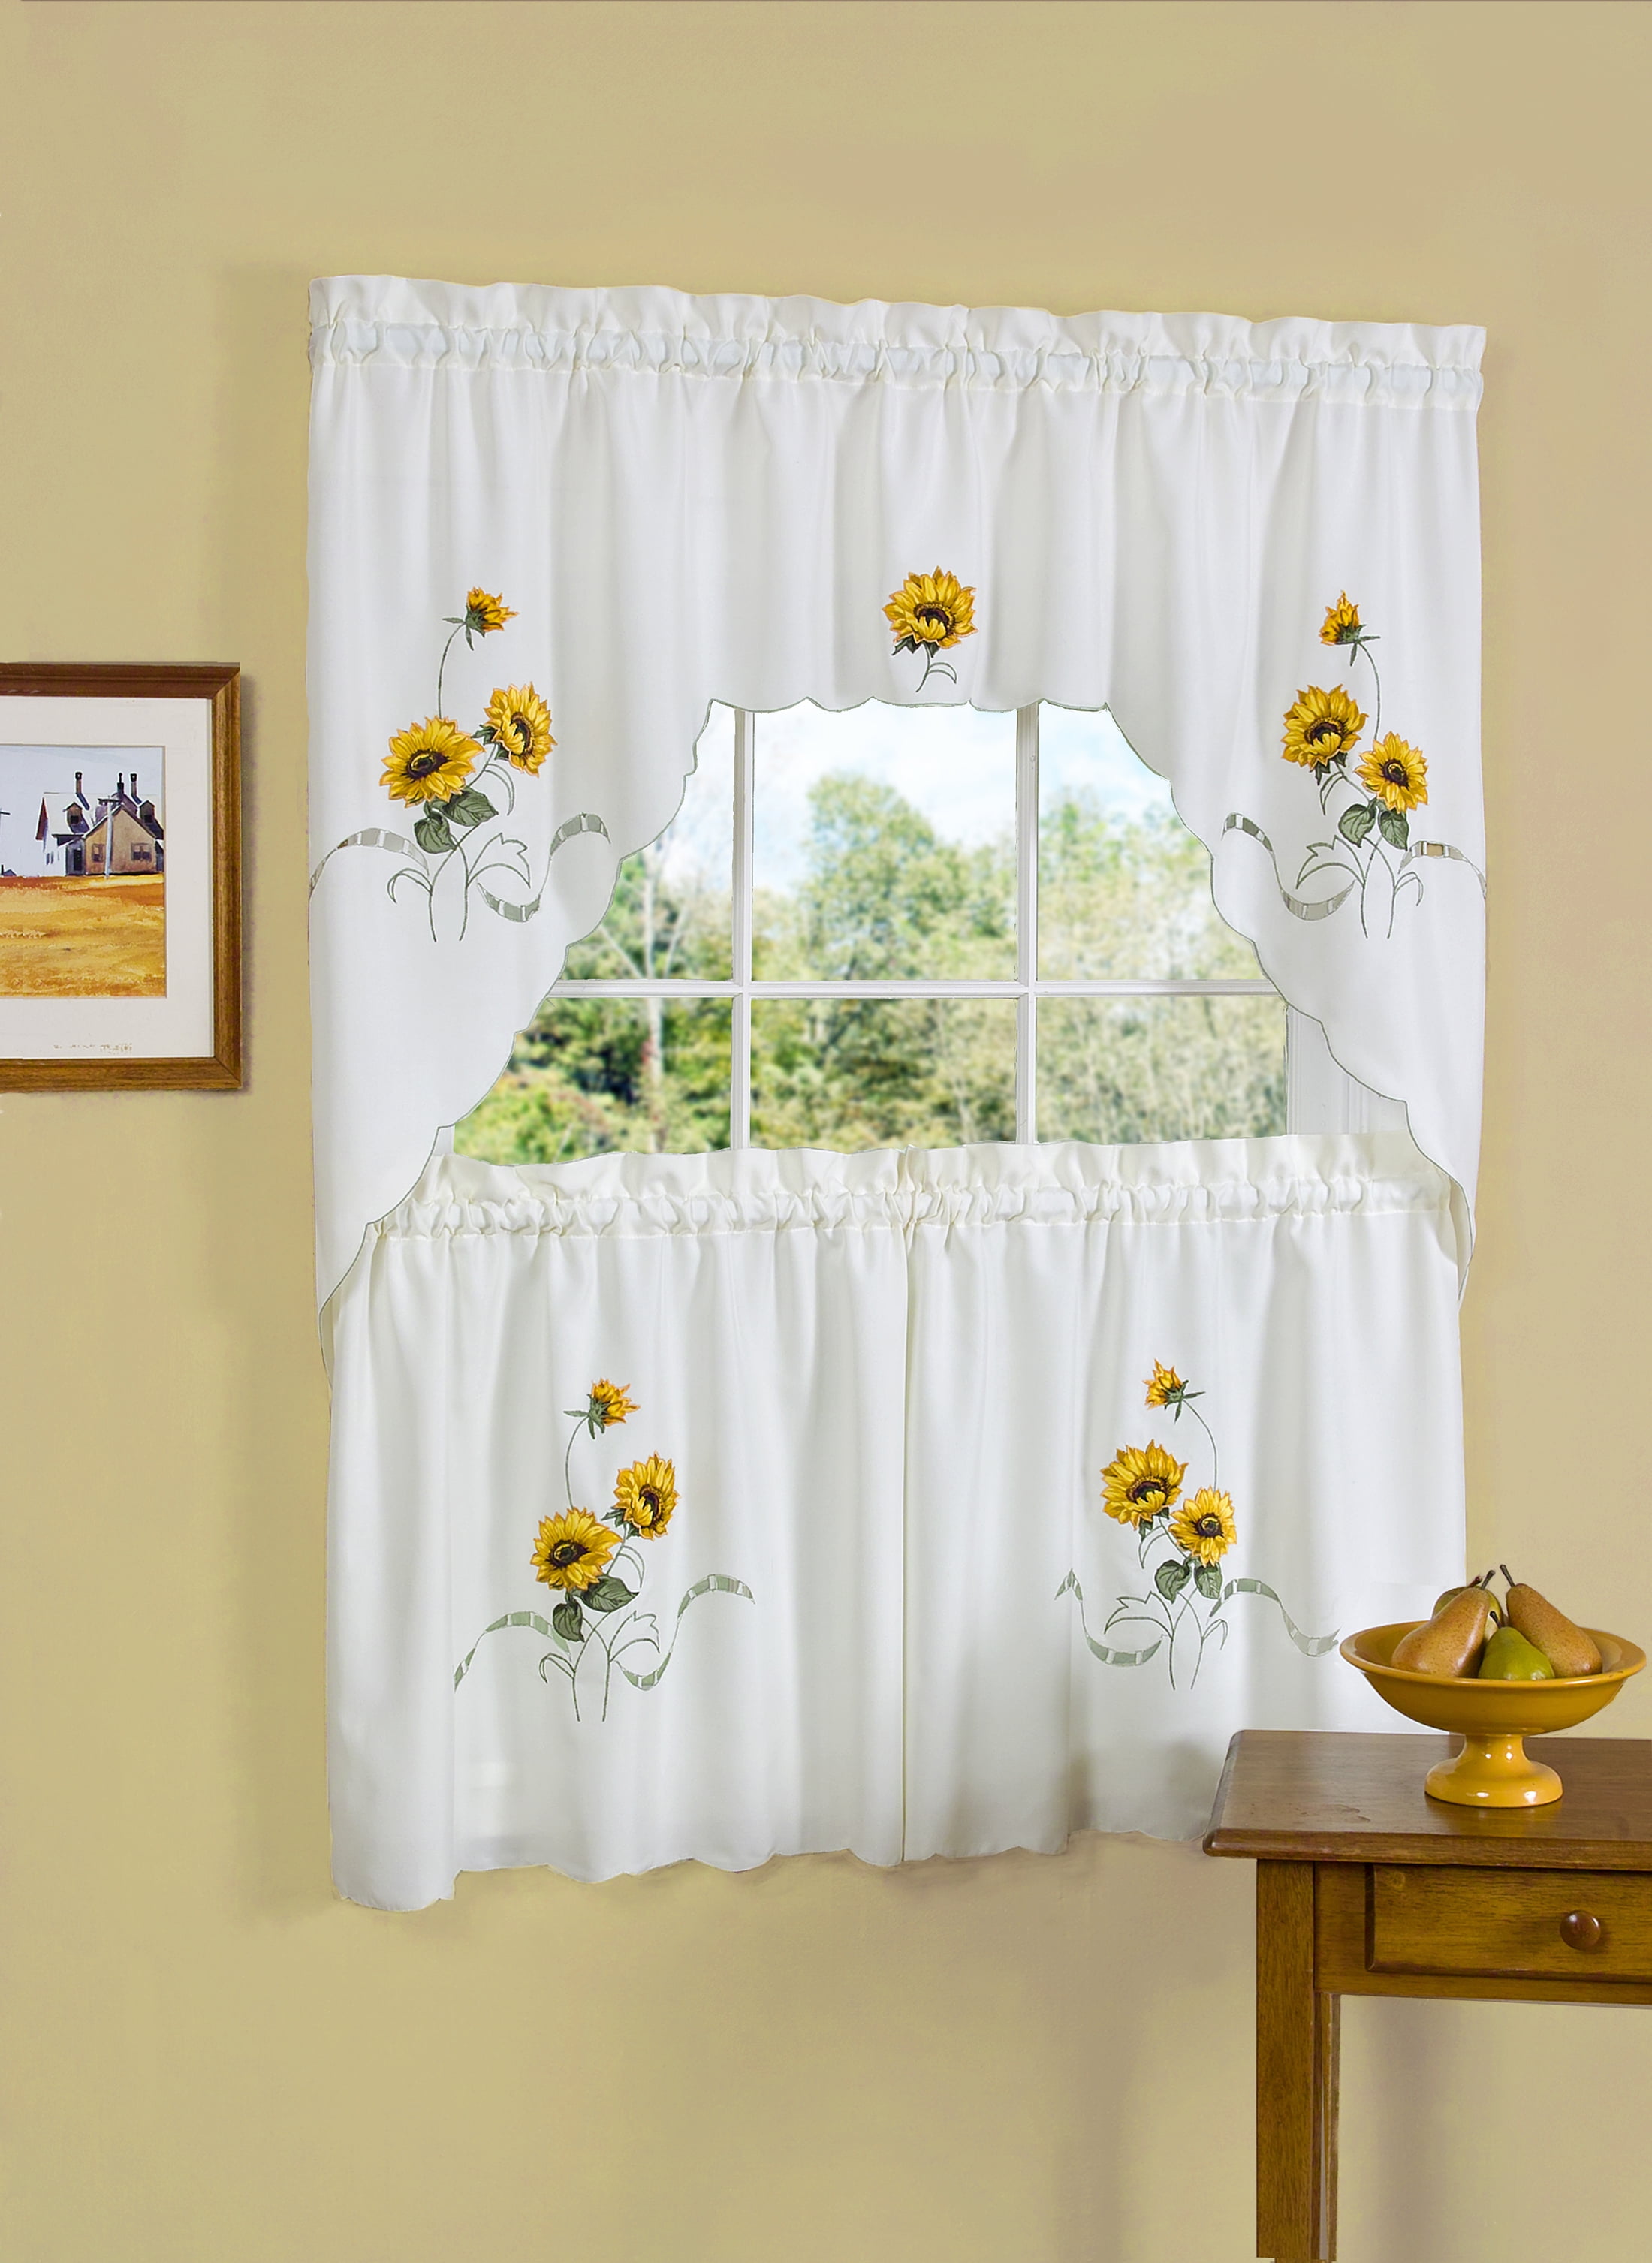 GOLD SUNFLOWERS BRIGHTER & SOFTER 3pcs voile kitchen curtain/ cafe curtain set 